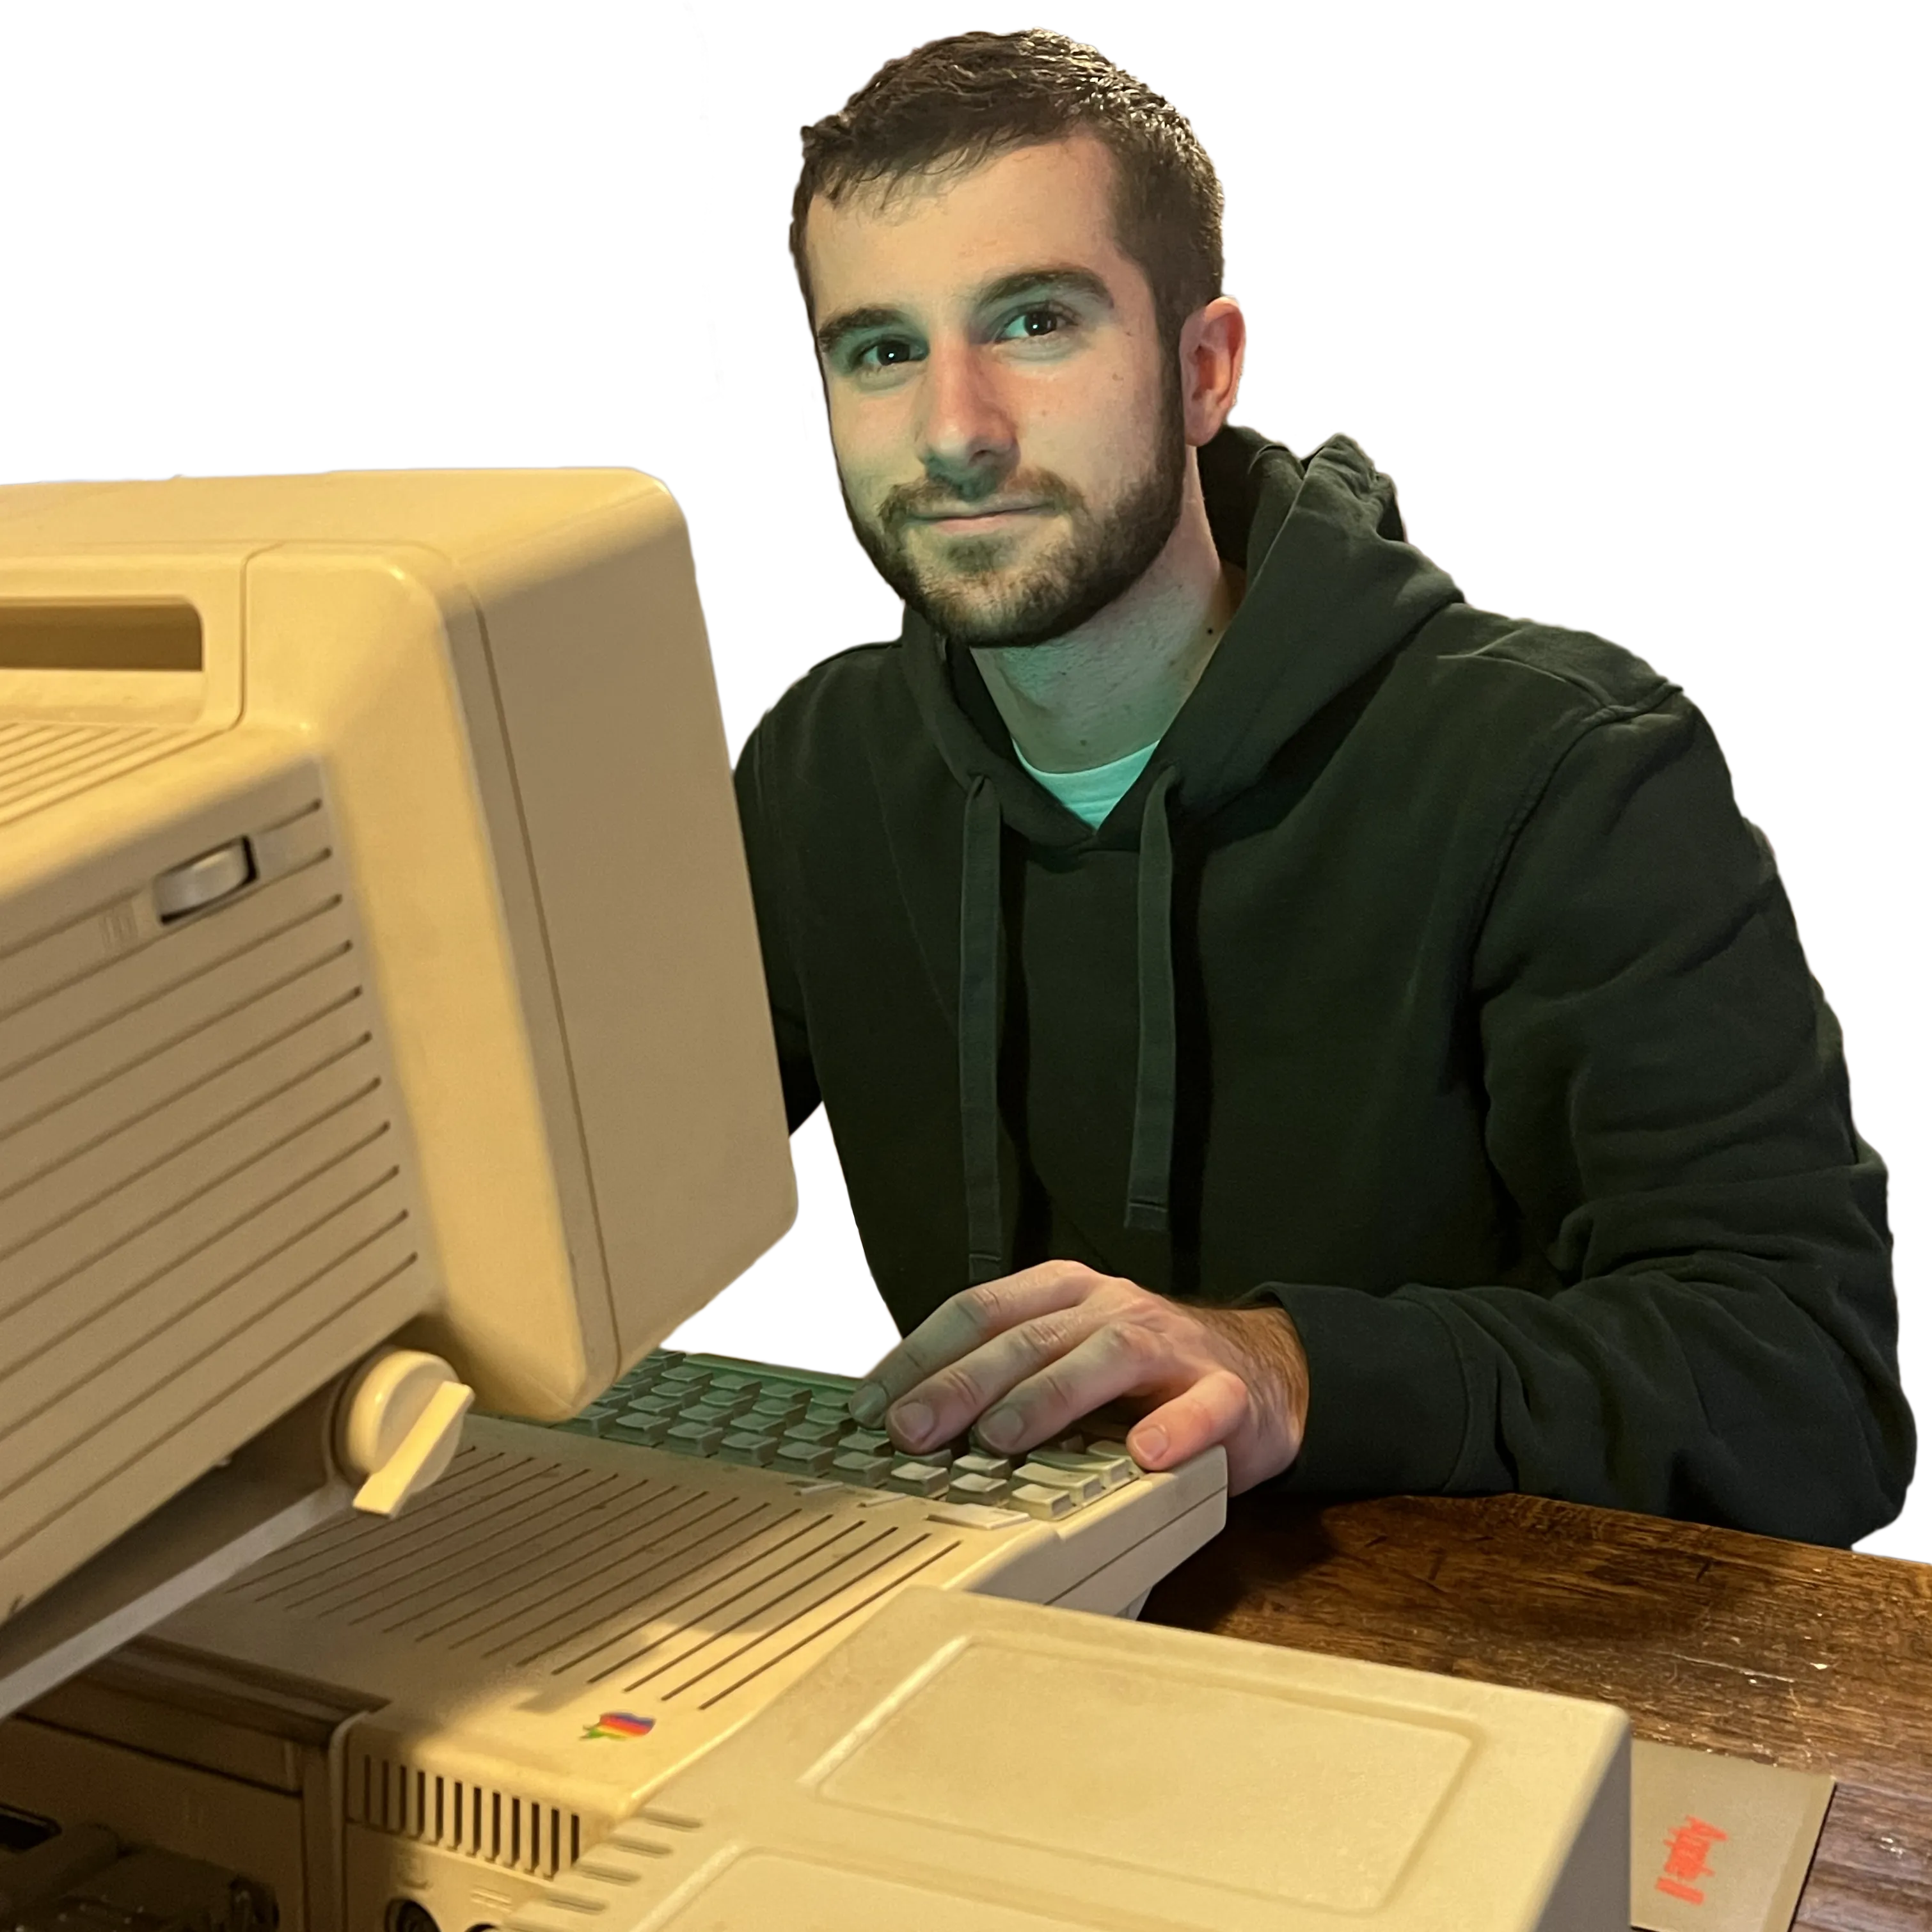 Photograph of Miguel using an Apple 2c computer.